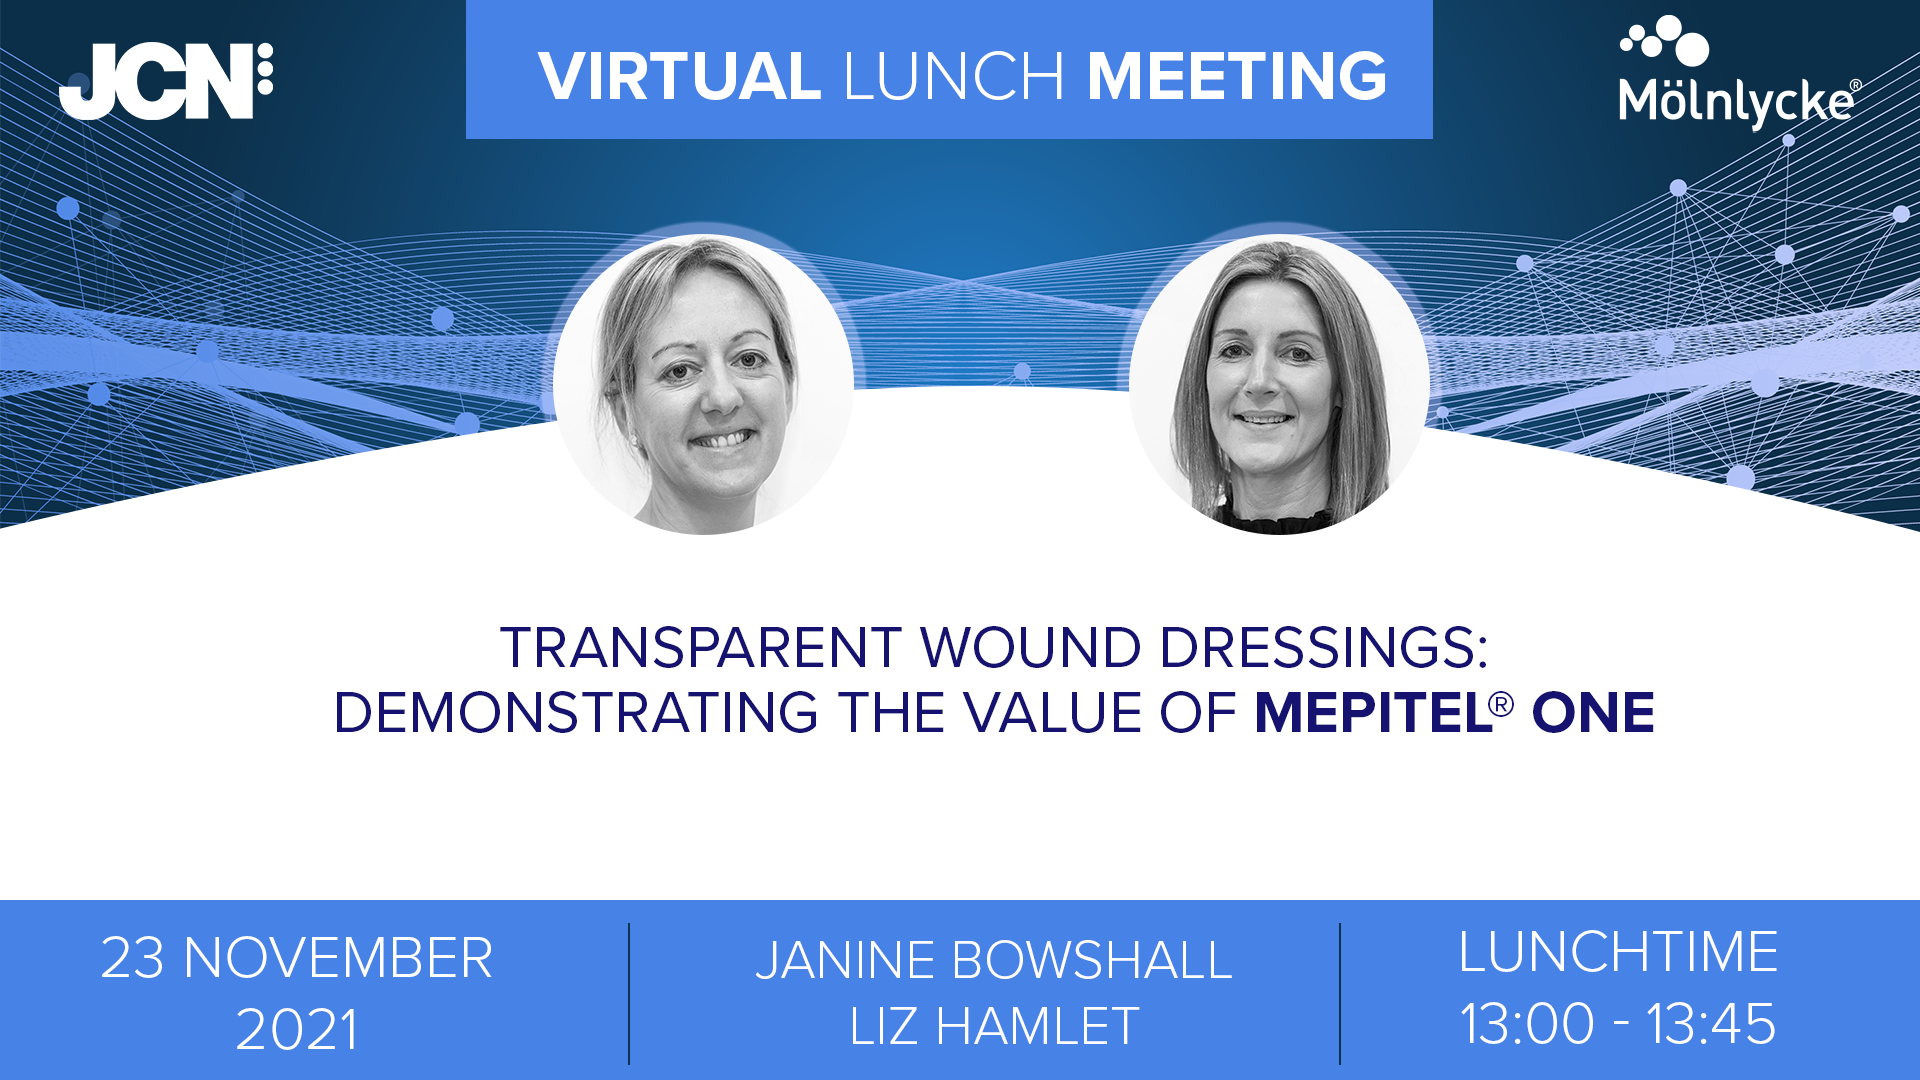 Virtual Lunch Meeting: Transparent wound dressings: Demonstrating the value of Mepitel® One